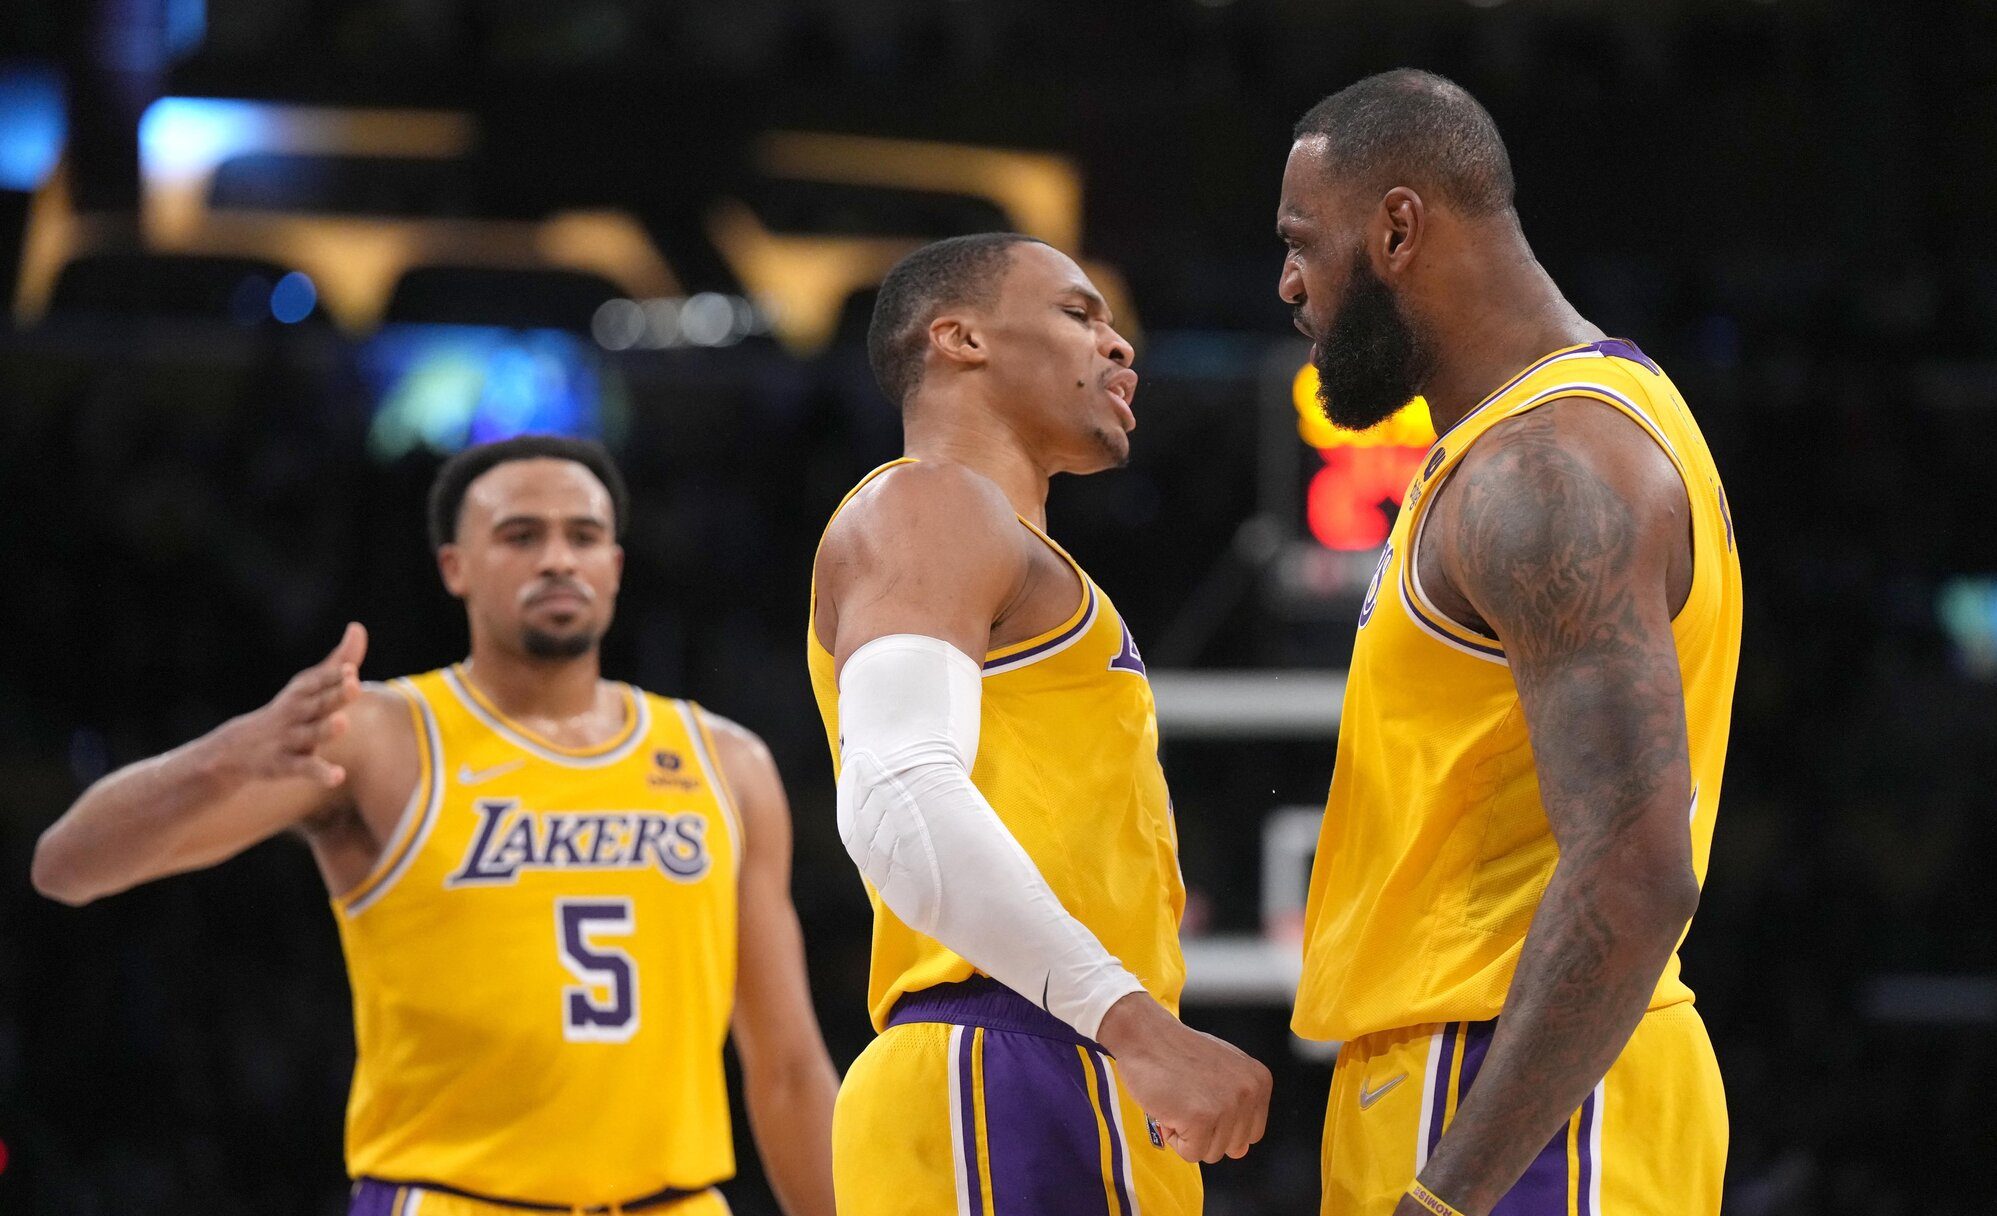 ‘Still a ton left in that tank’: Lakers coach Ham wants Westbrook involved